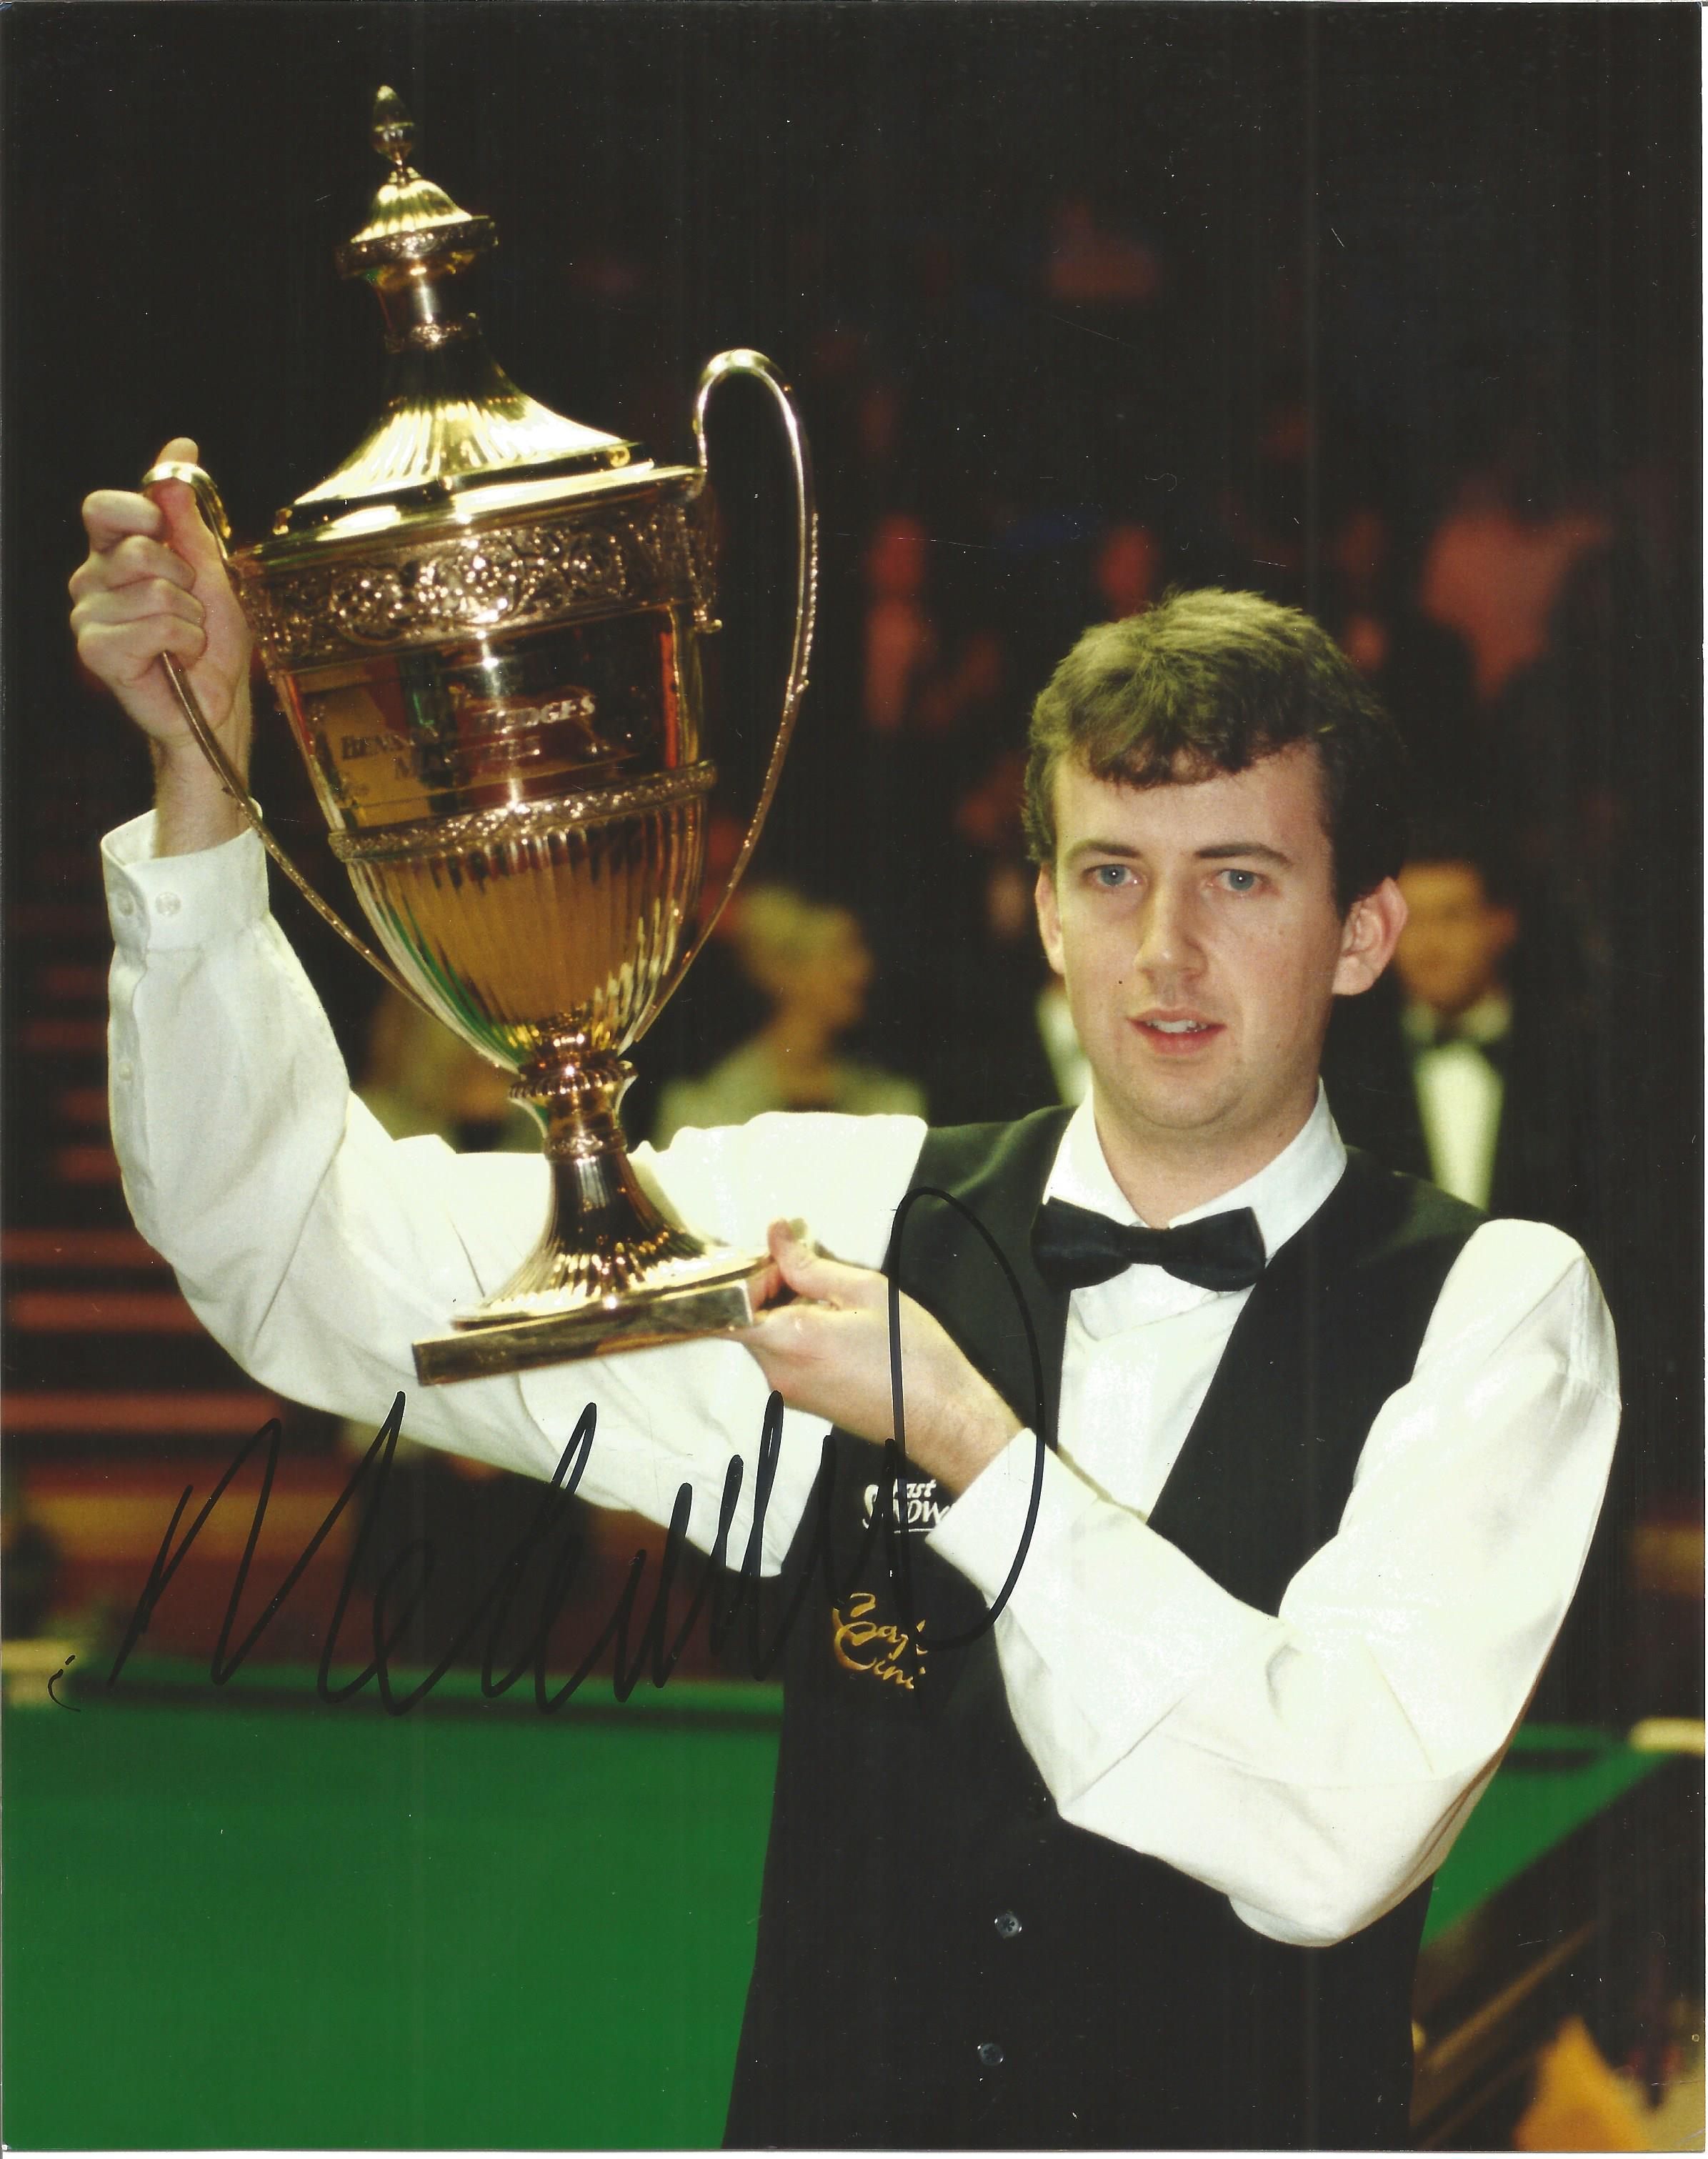 Mark Williams Signed Snooker 1998 Press 8x10 Photo. Good condition. All autographs come with a